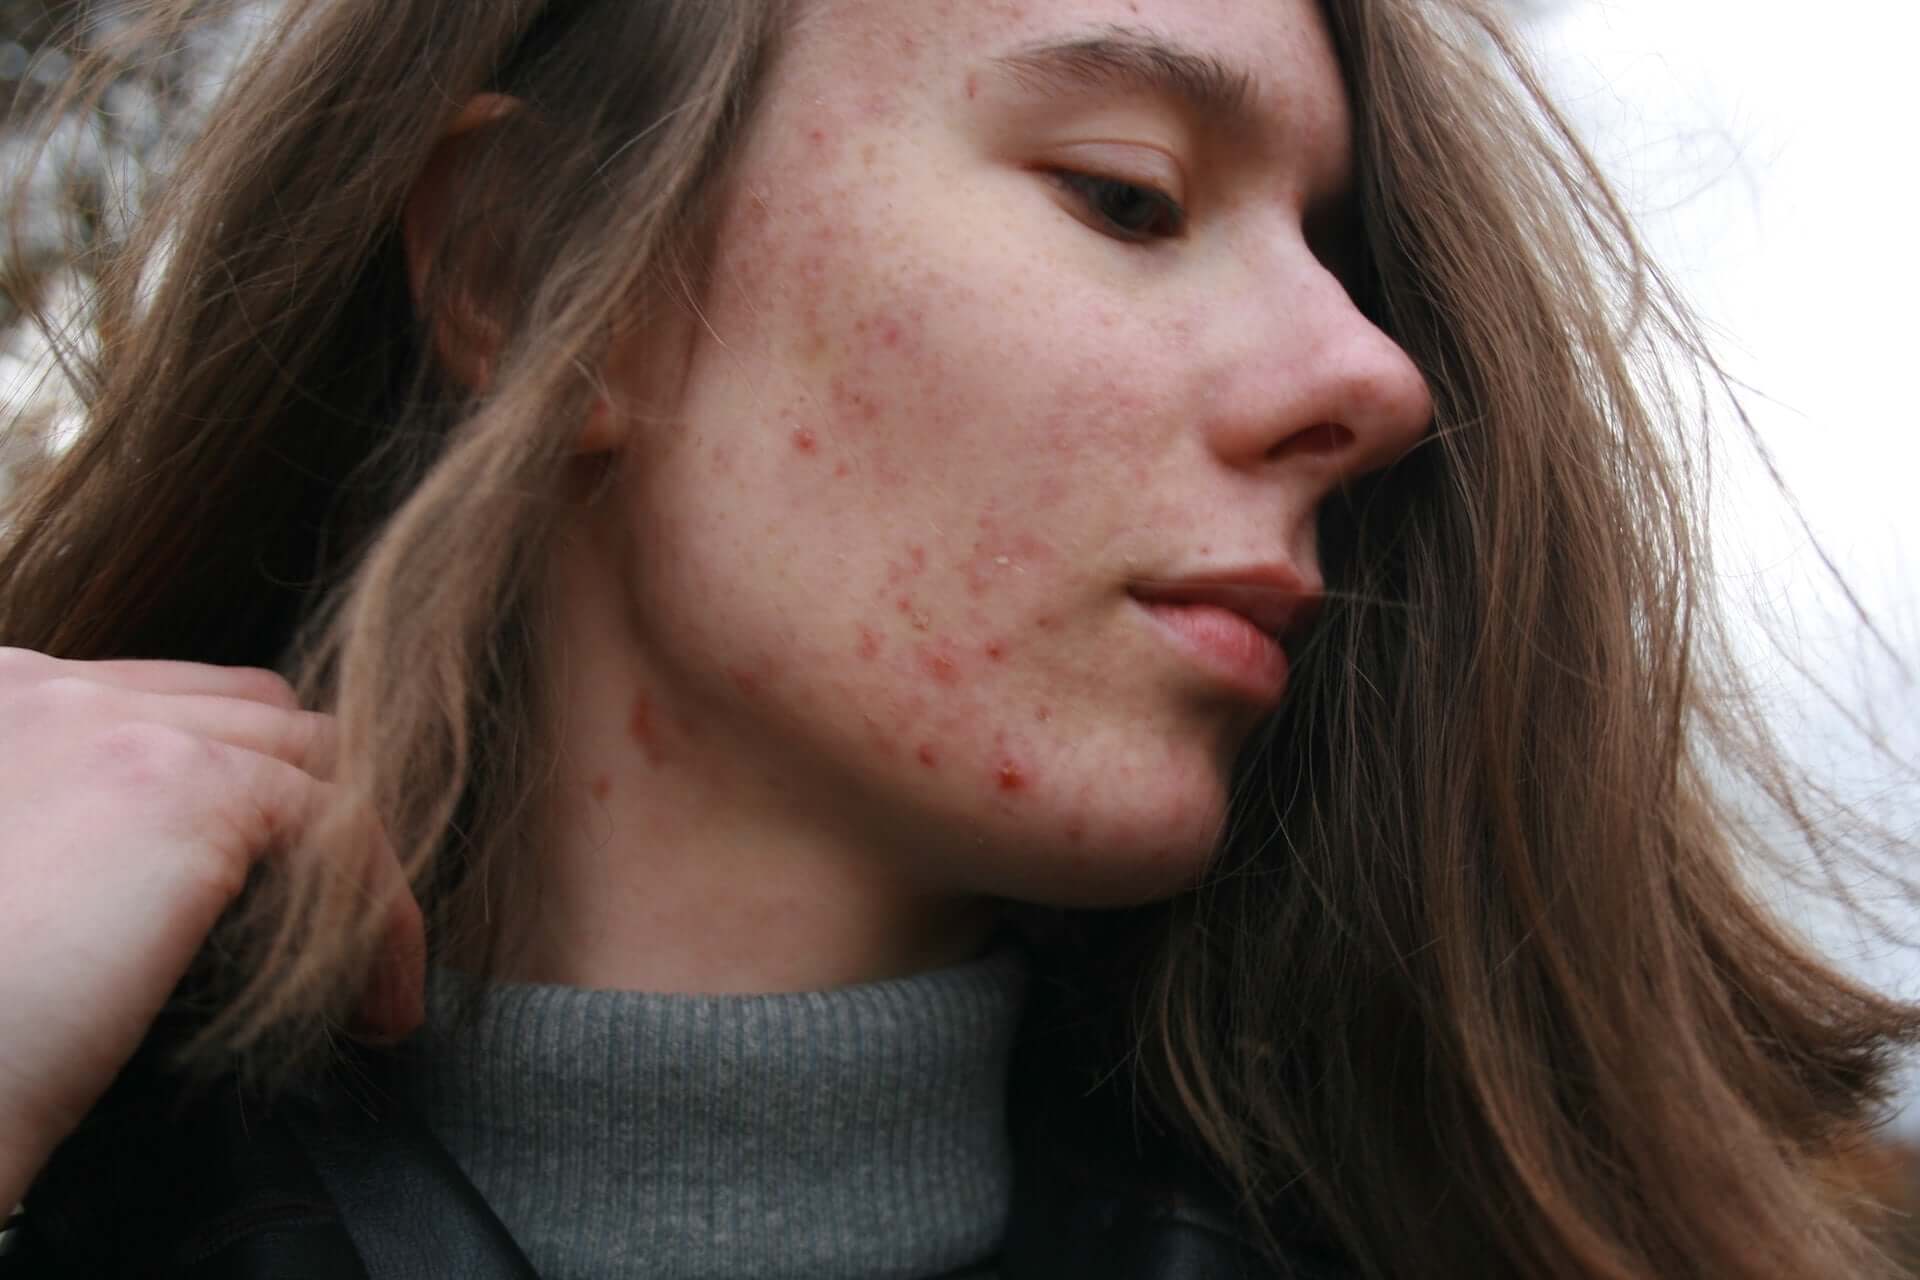 A white woman with long brown hair and light acne on her face.